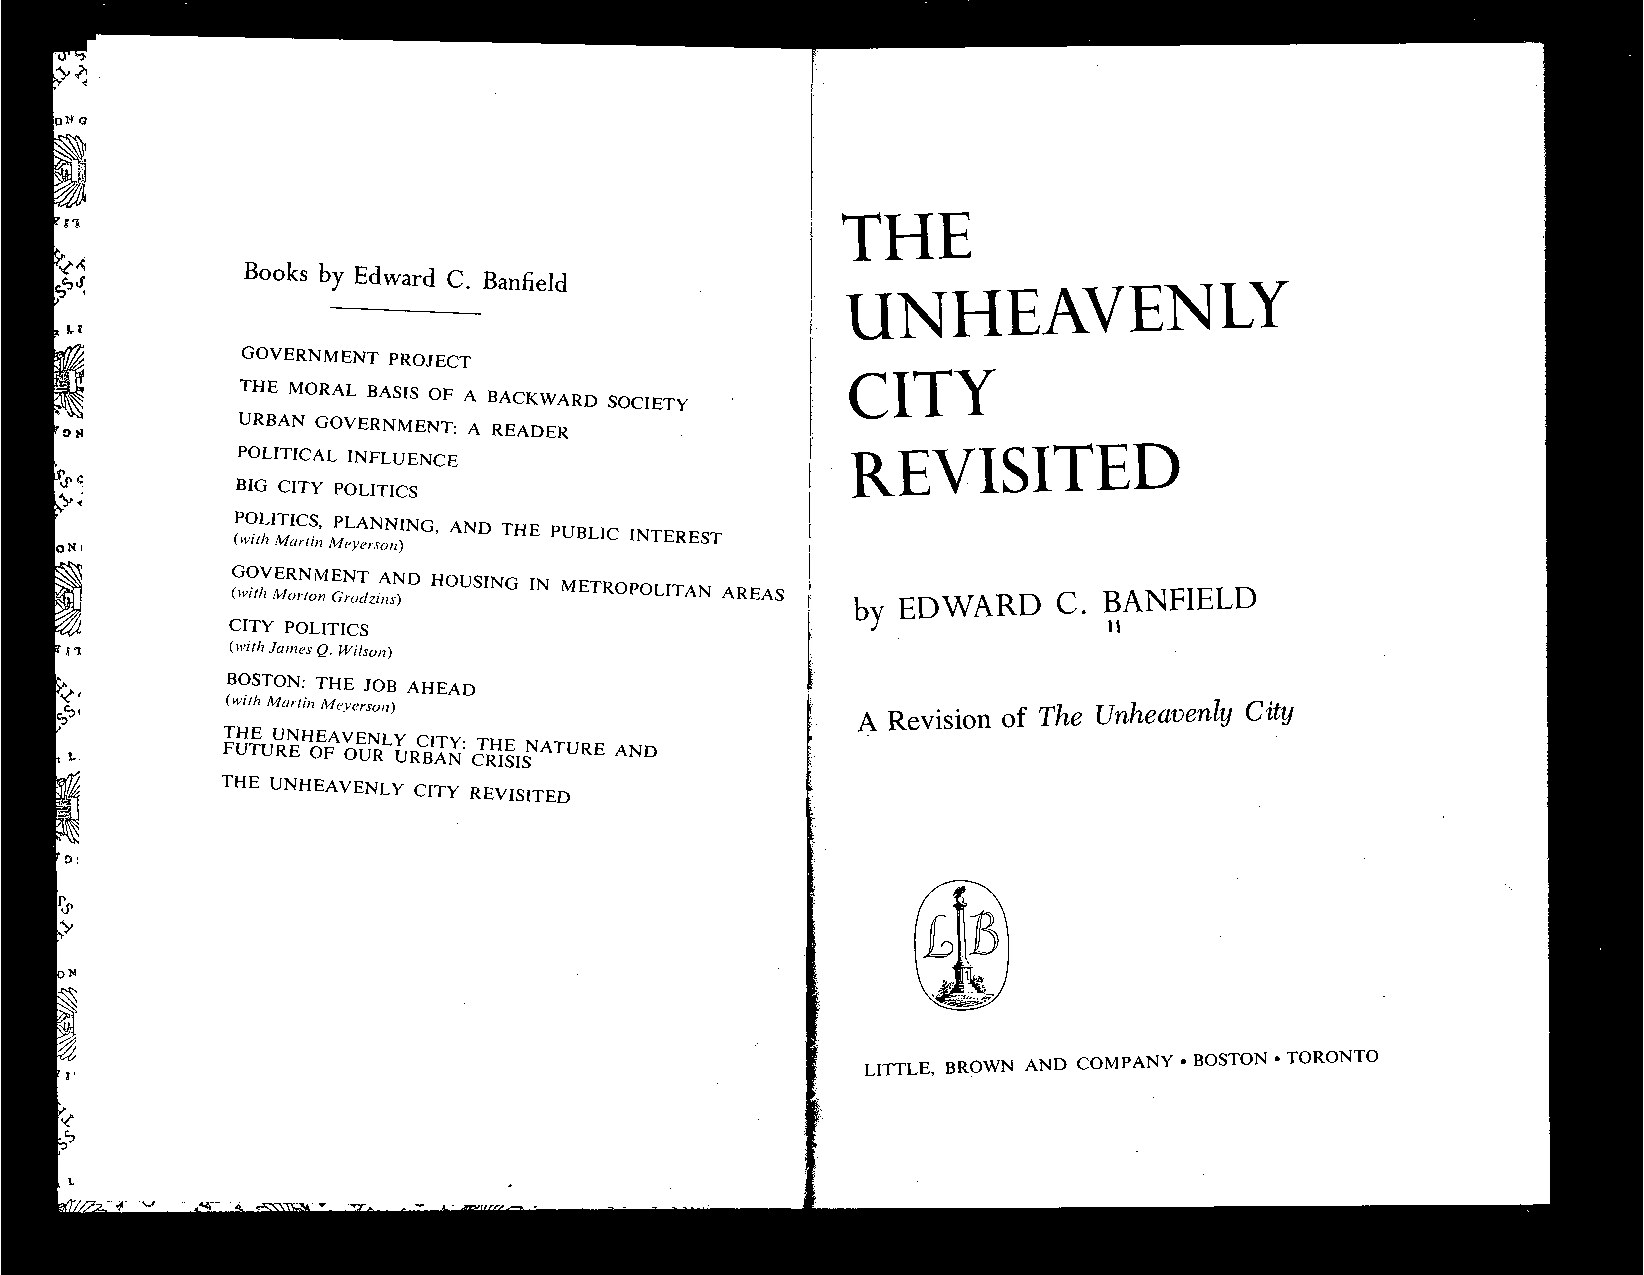 Edward C. Banfield - The unheavenly city revisited